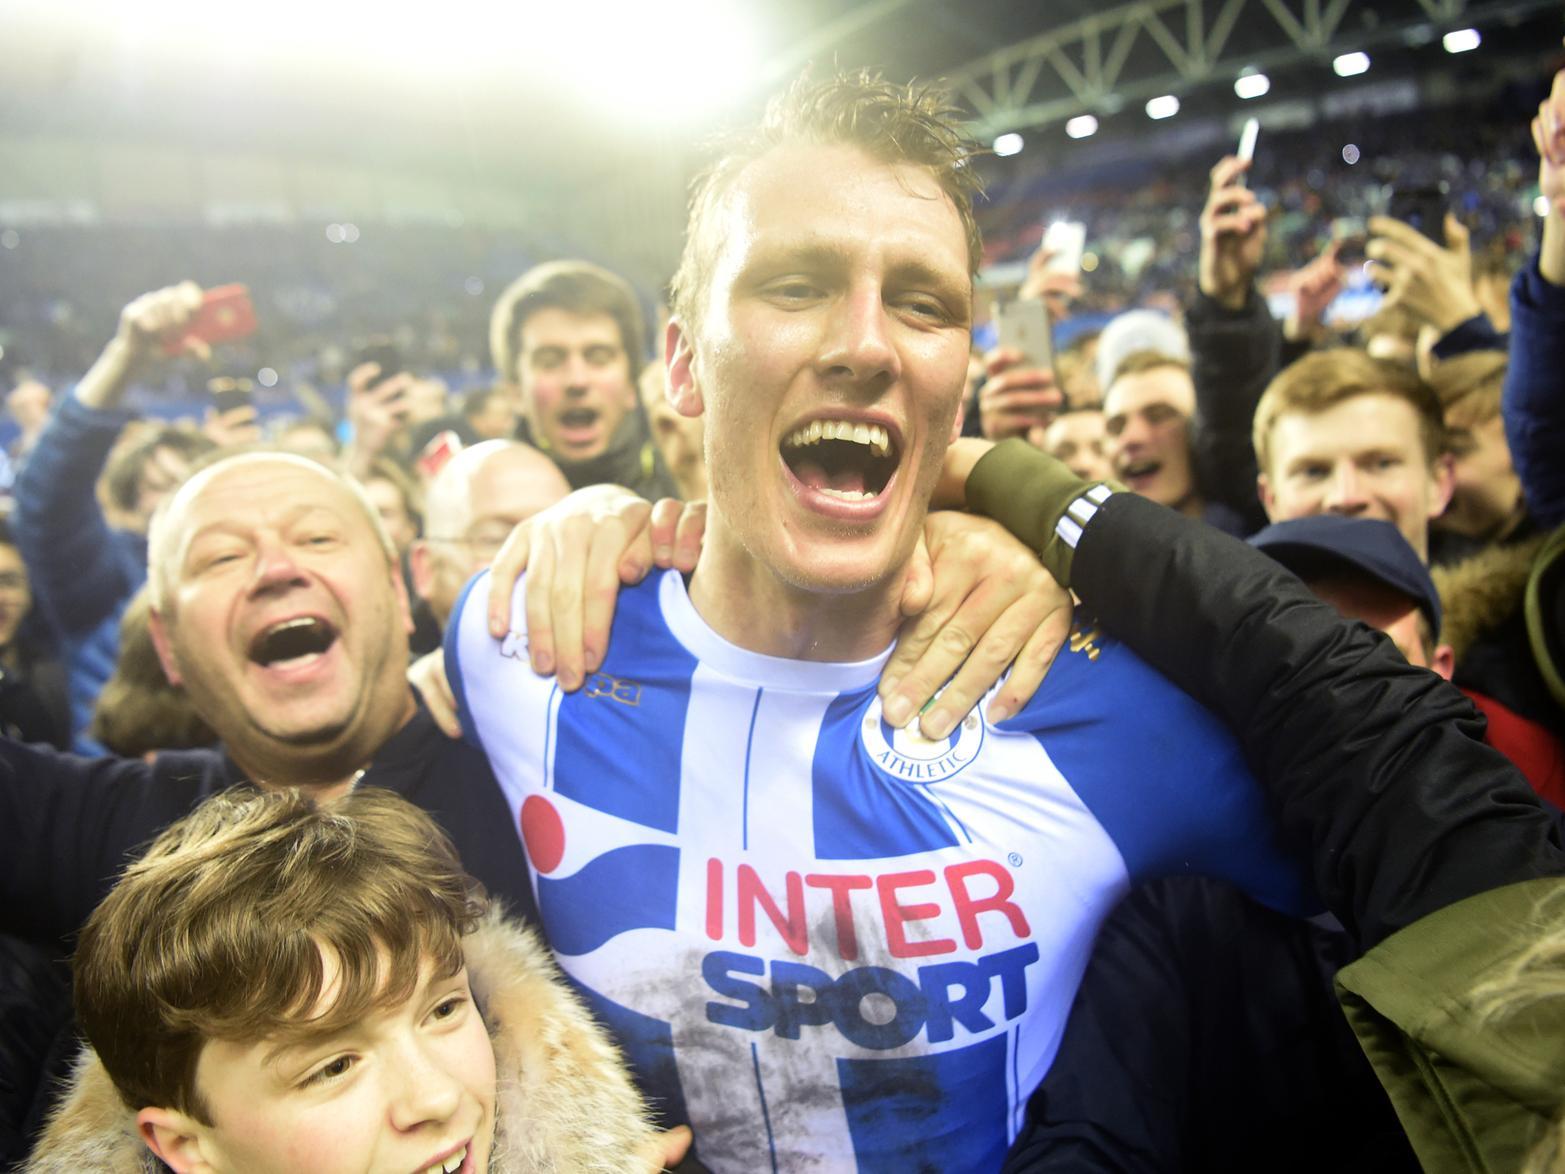 CENTRE-BACK: DAN BURN- Only spent two-and-a-half years with Latics but, after a shaky start, left his mark with a level of performance that saw him named player of the year in his first season and in the League One 'team of the year' in his second campaign. Now starring back in the Premier League at Brighton.